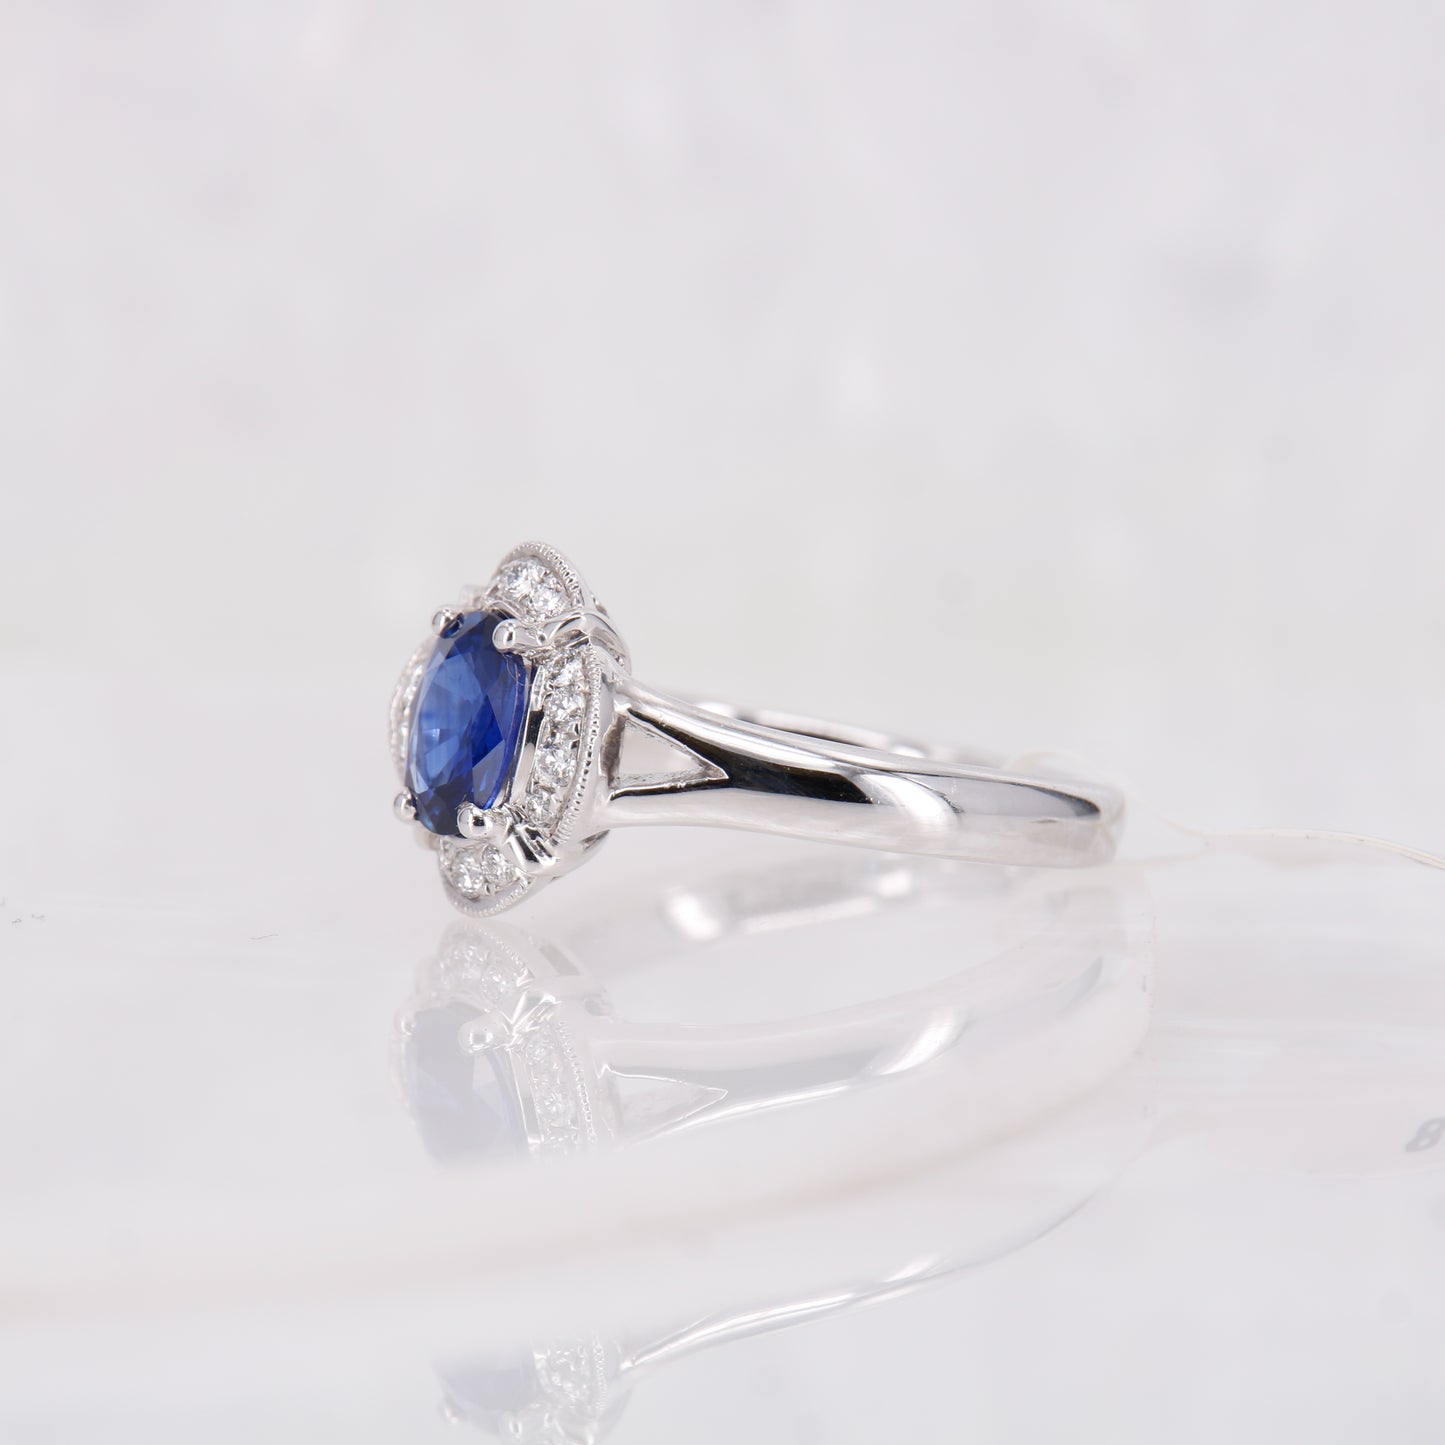 18ct White Gold Oval Cut Sapphire and Diamond Ring